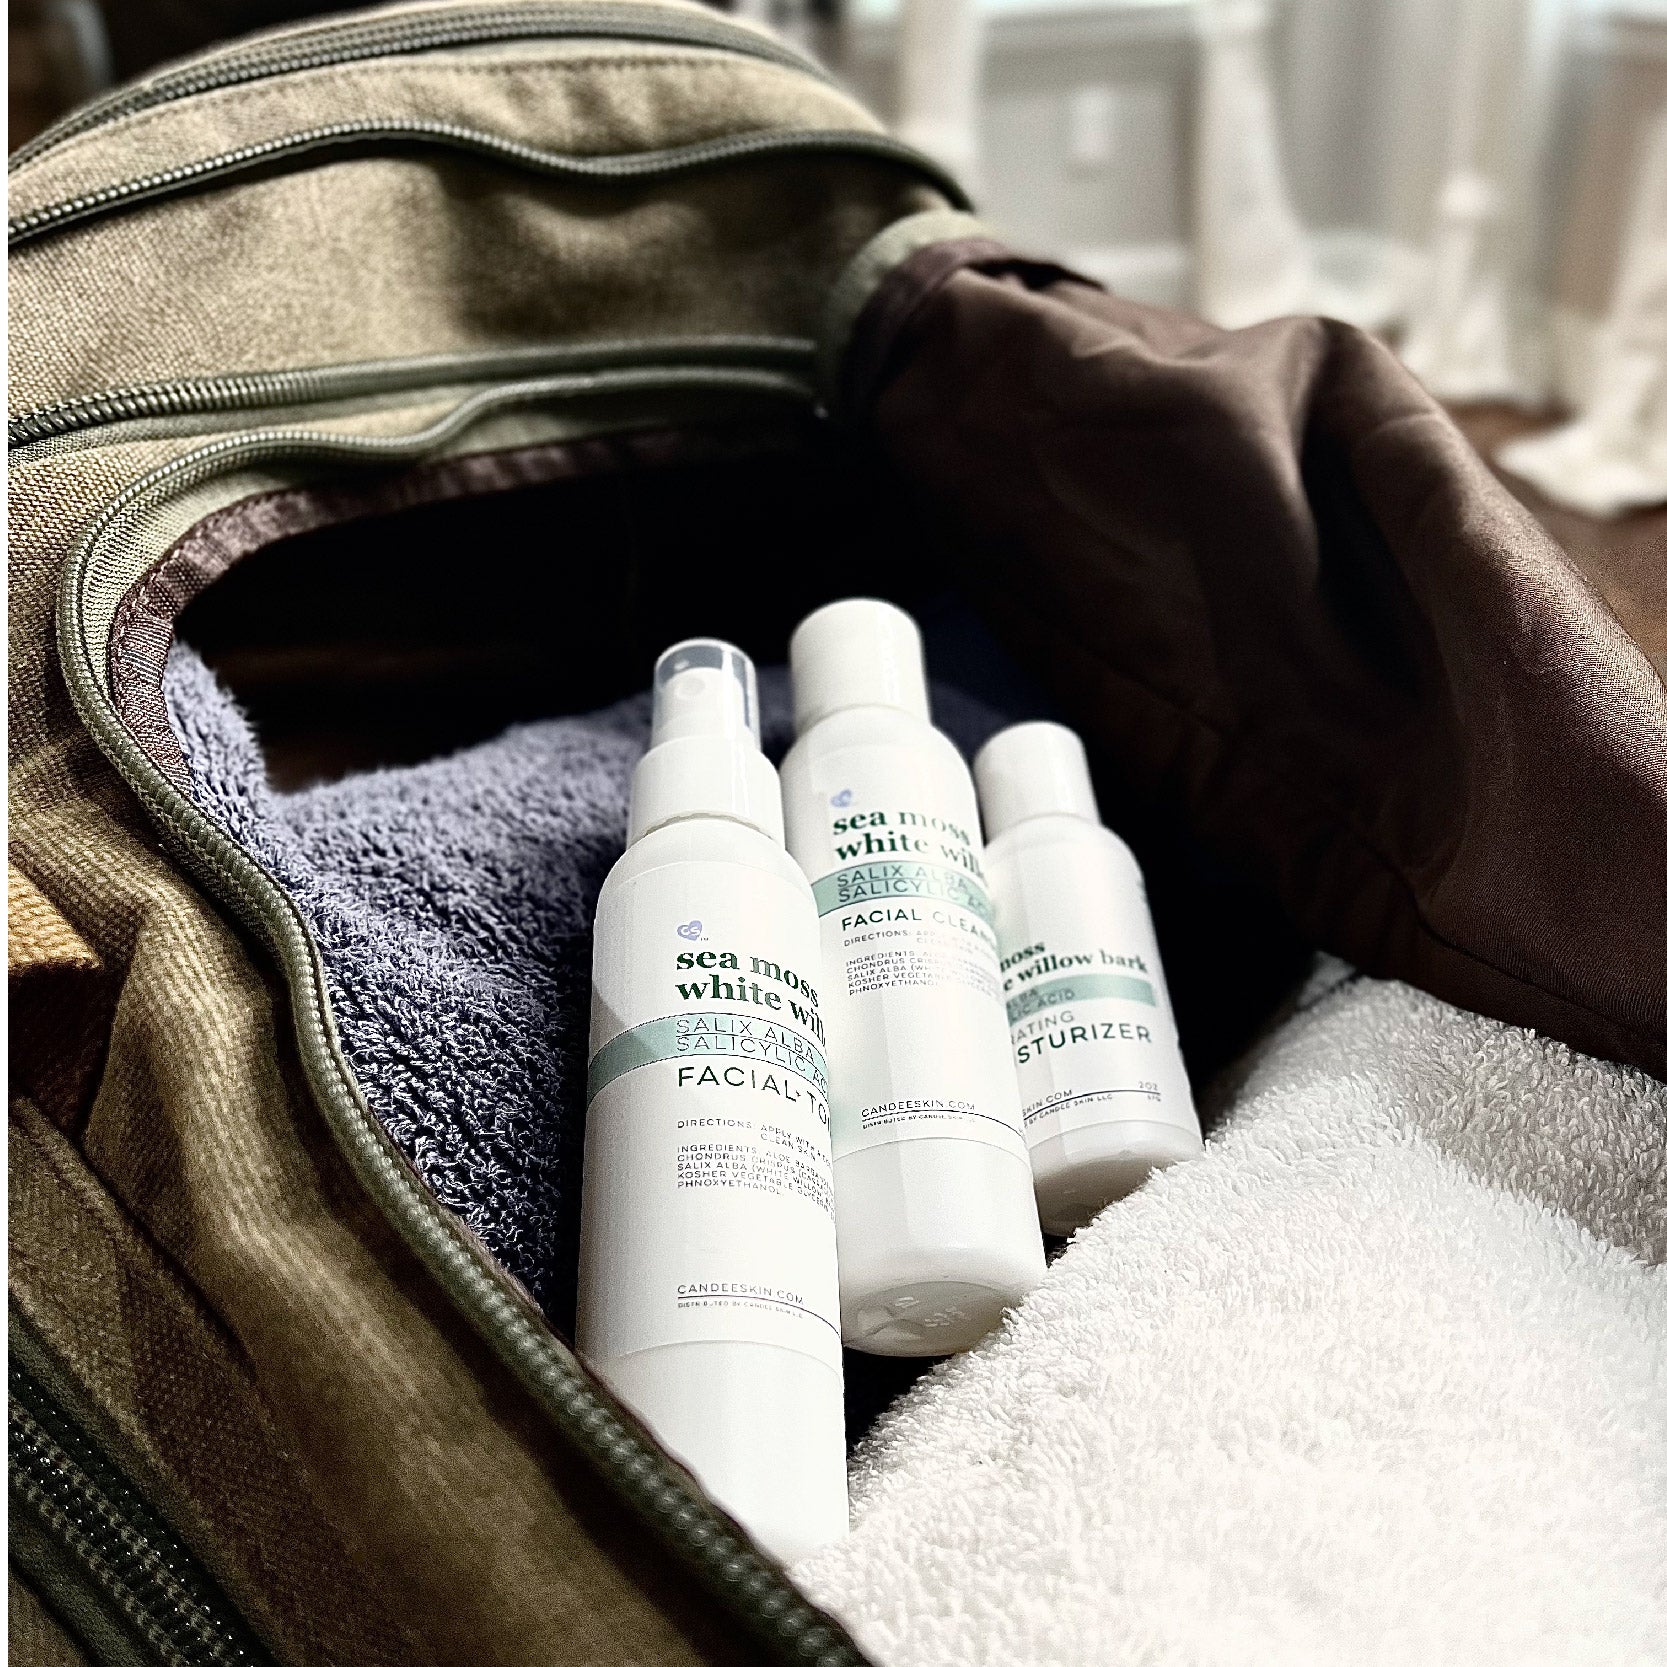 Sea Moss-White Willow Bark Facial Moisturizer, Moisturizer and Facial Toner in duffel bag. Candee Skin Shop. Skin Science Simplified.